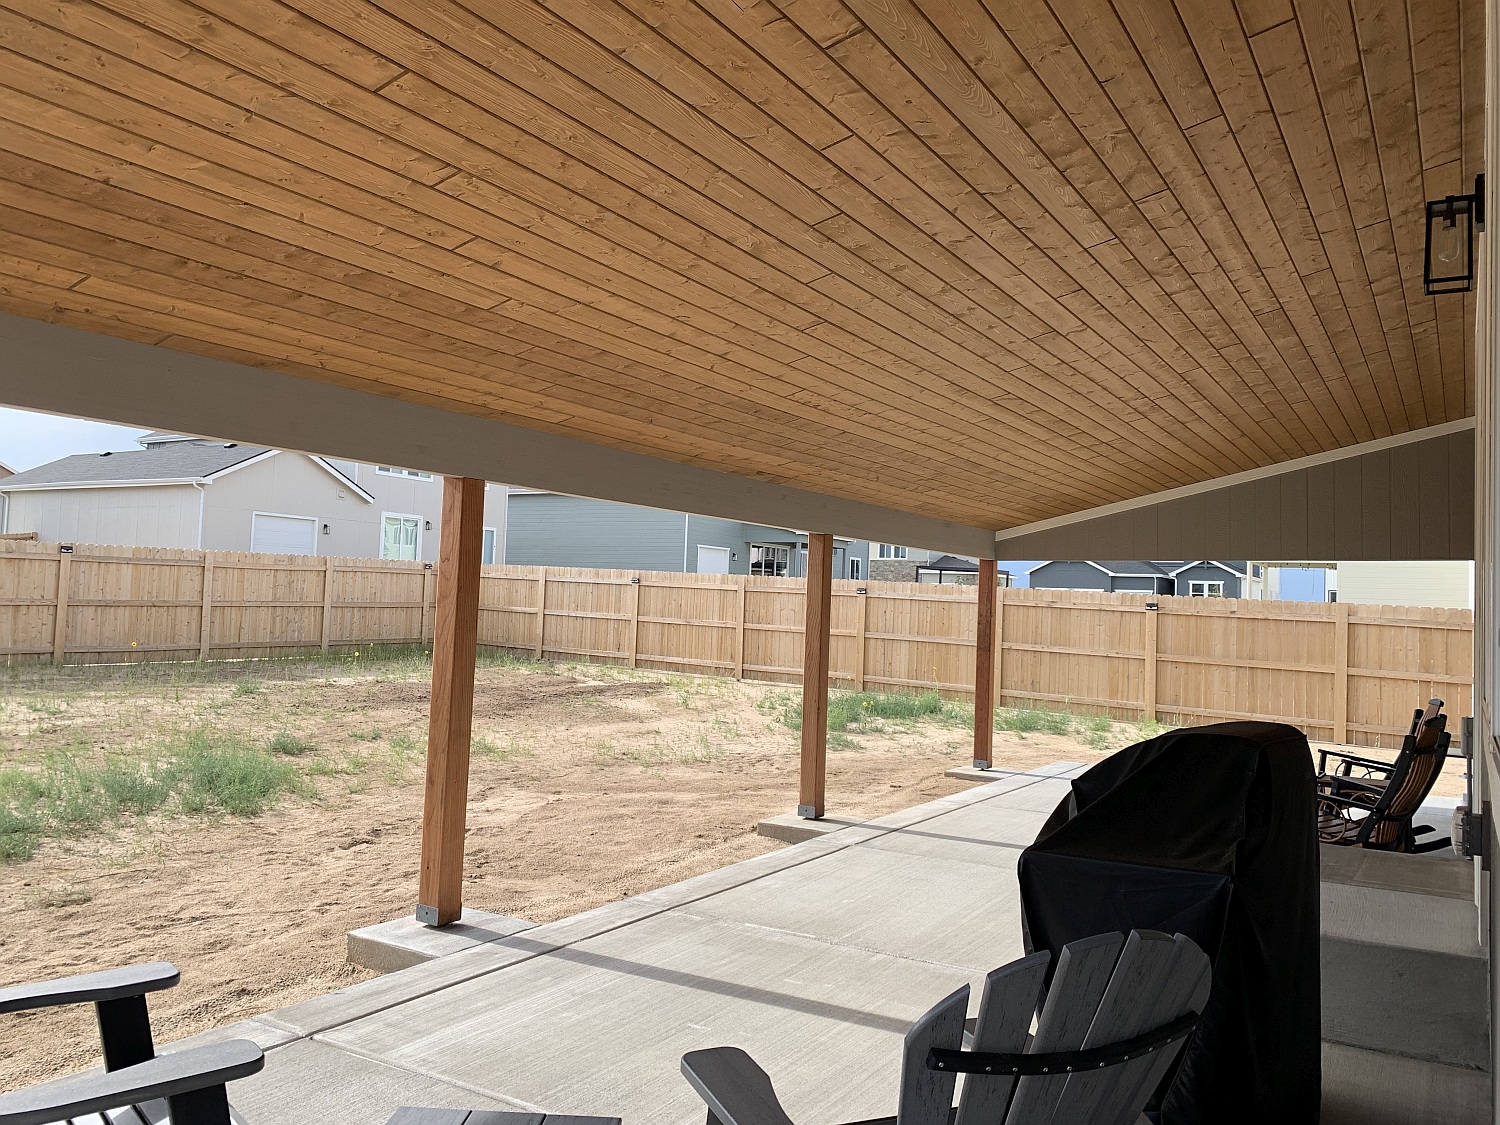 Shed roof patio cover with a tongue and groove ceiling in Texas Honey Brown